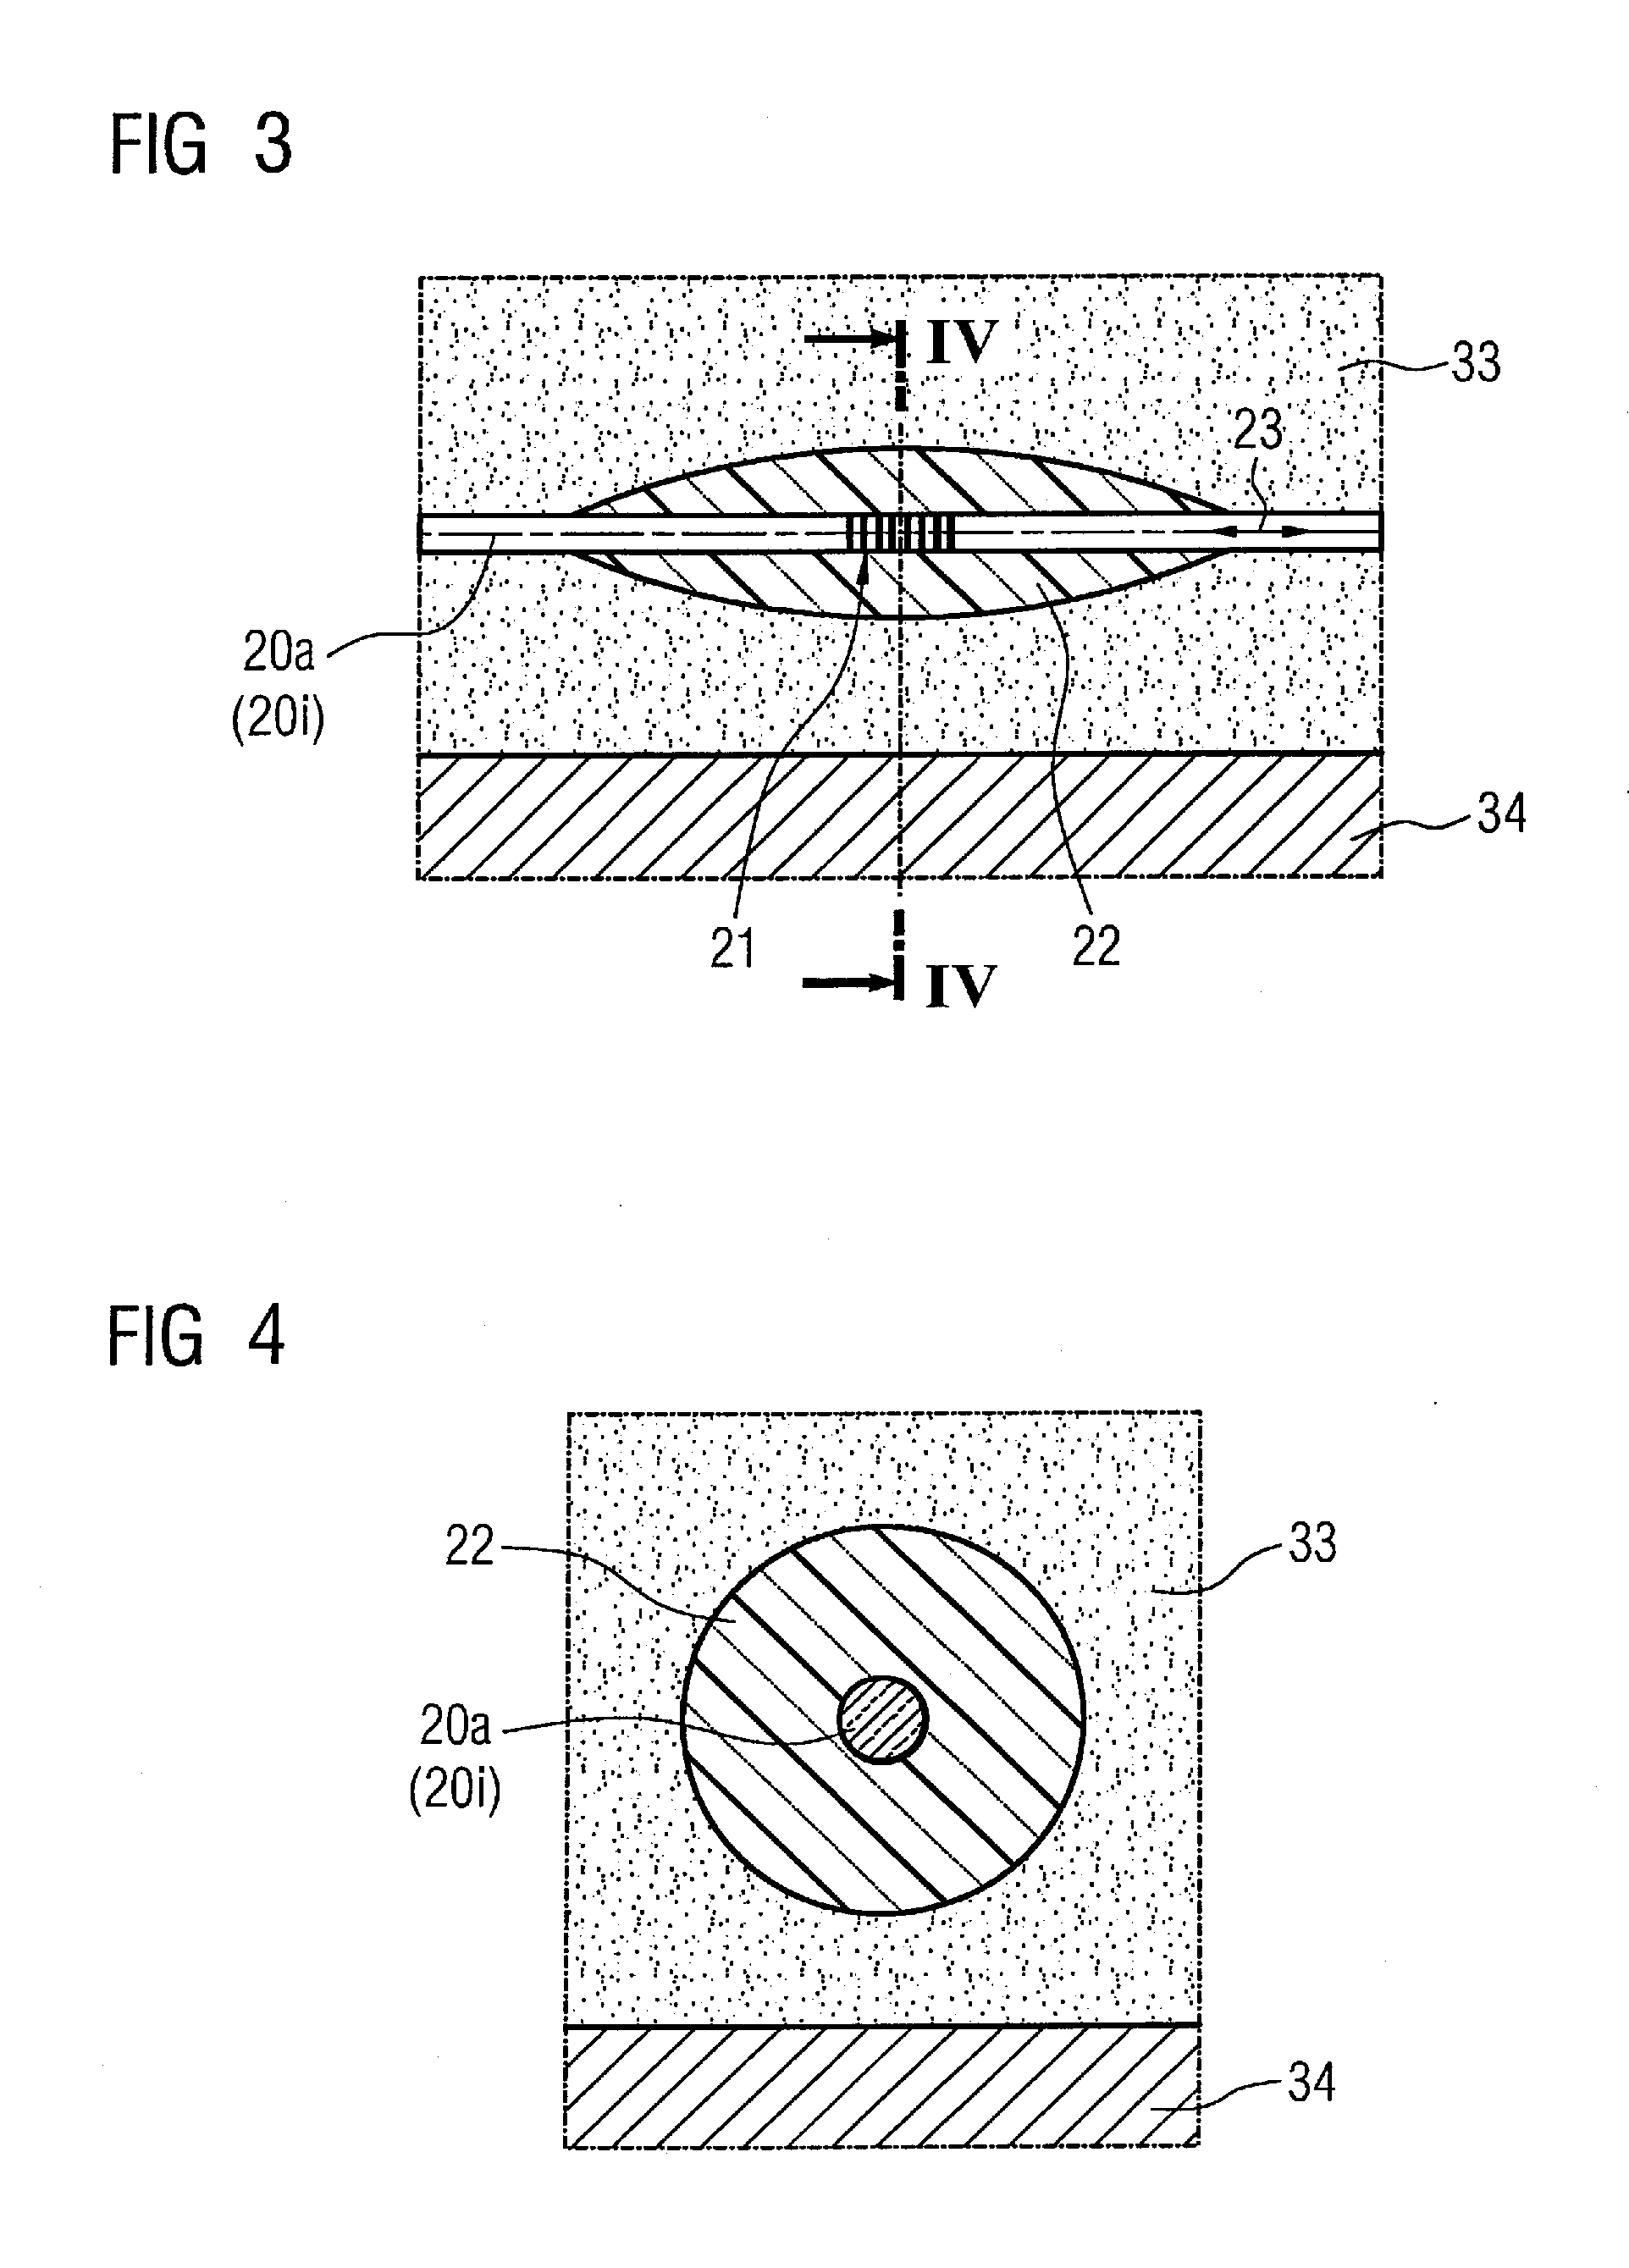 Optical measuring device for determining temperature in a cryogenic environment and winding arrangement whose temperature can be monitored